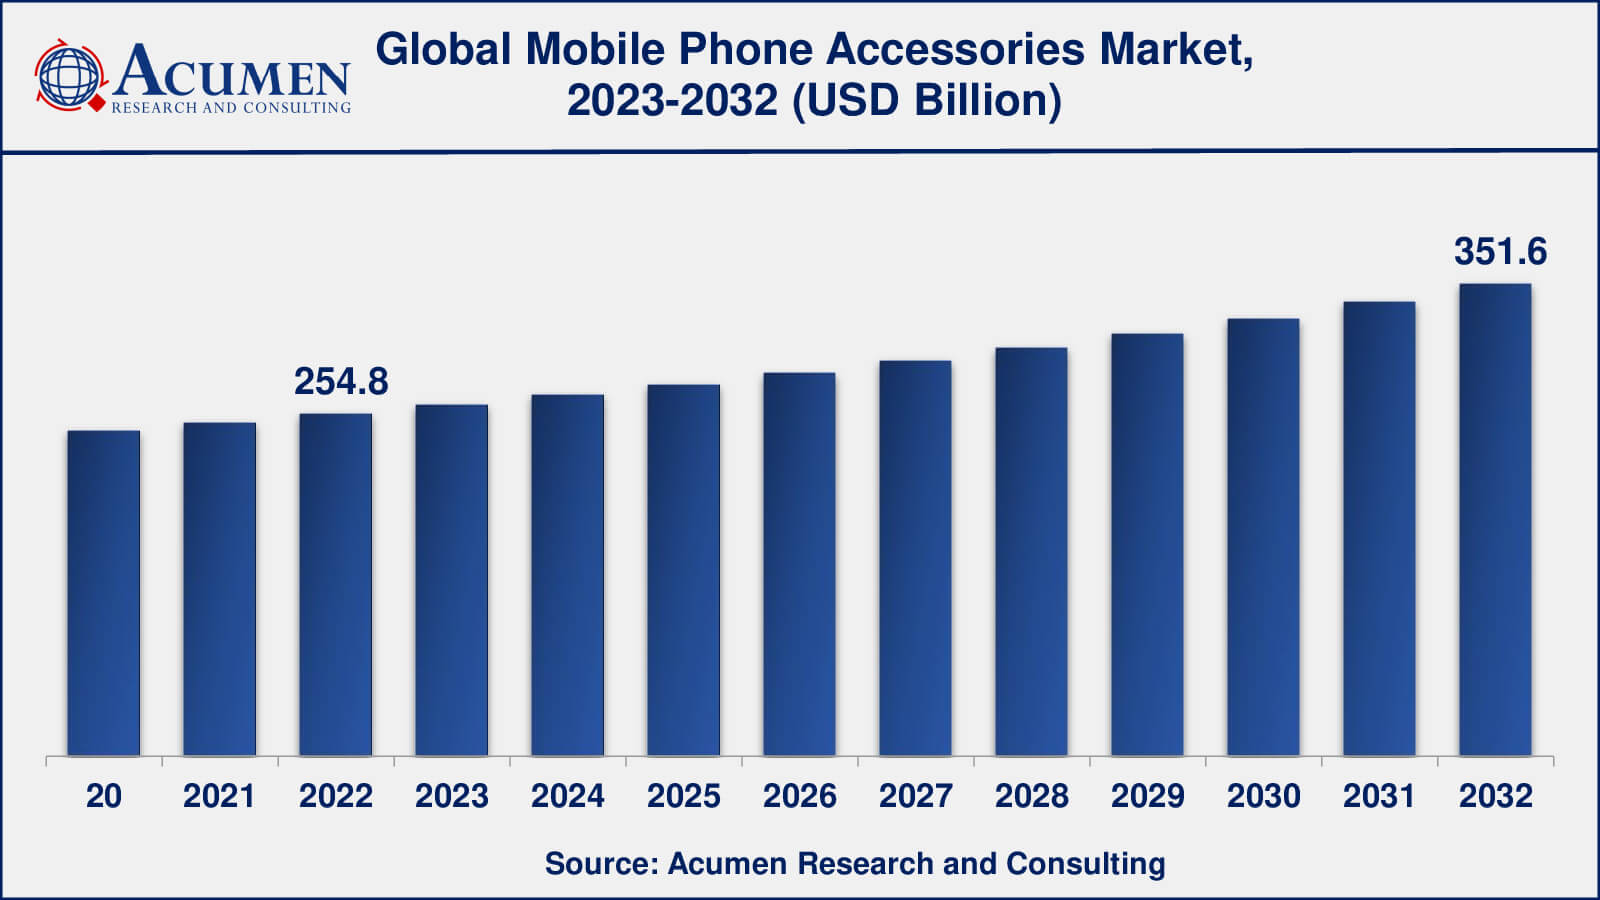 Global Mobile Phone Accessories Market Dynamics